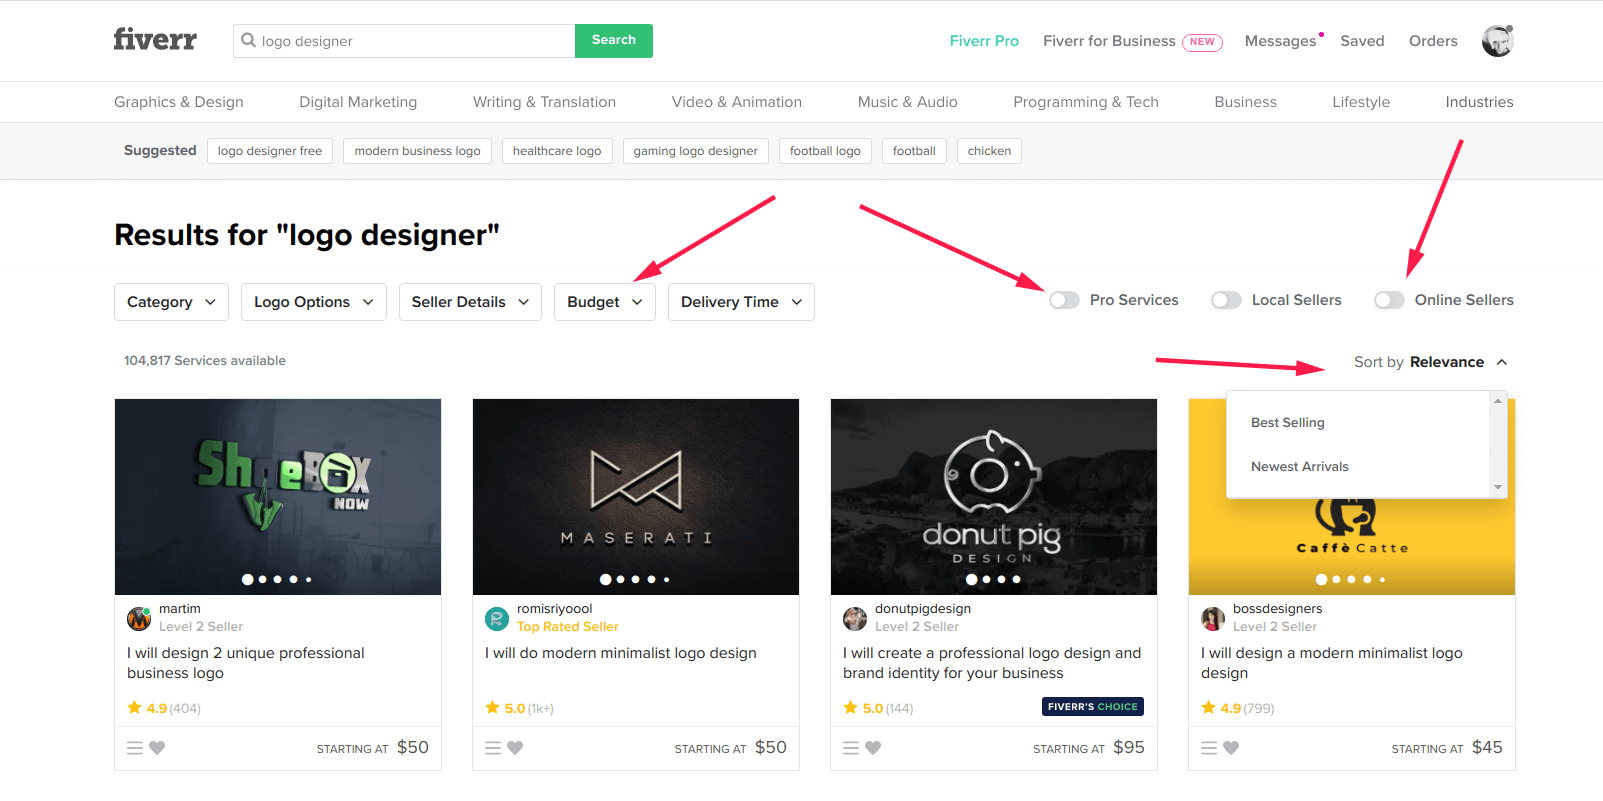 how to filter logo designers on Fiverr